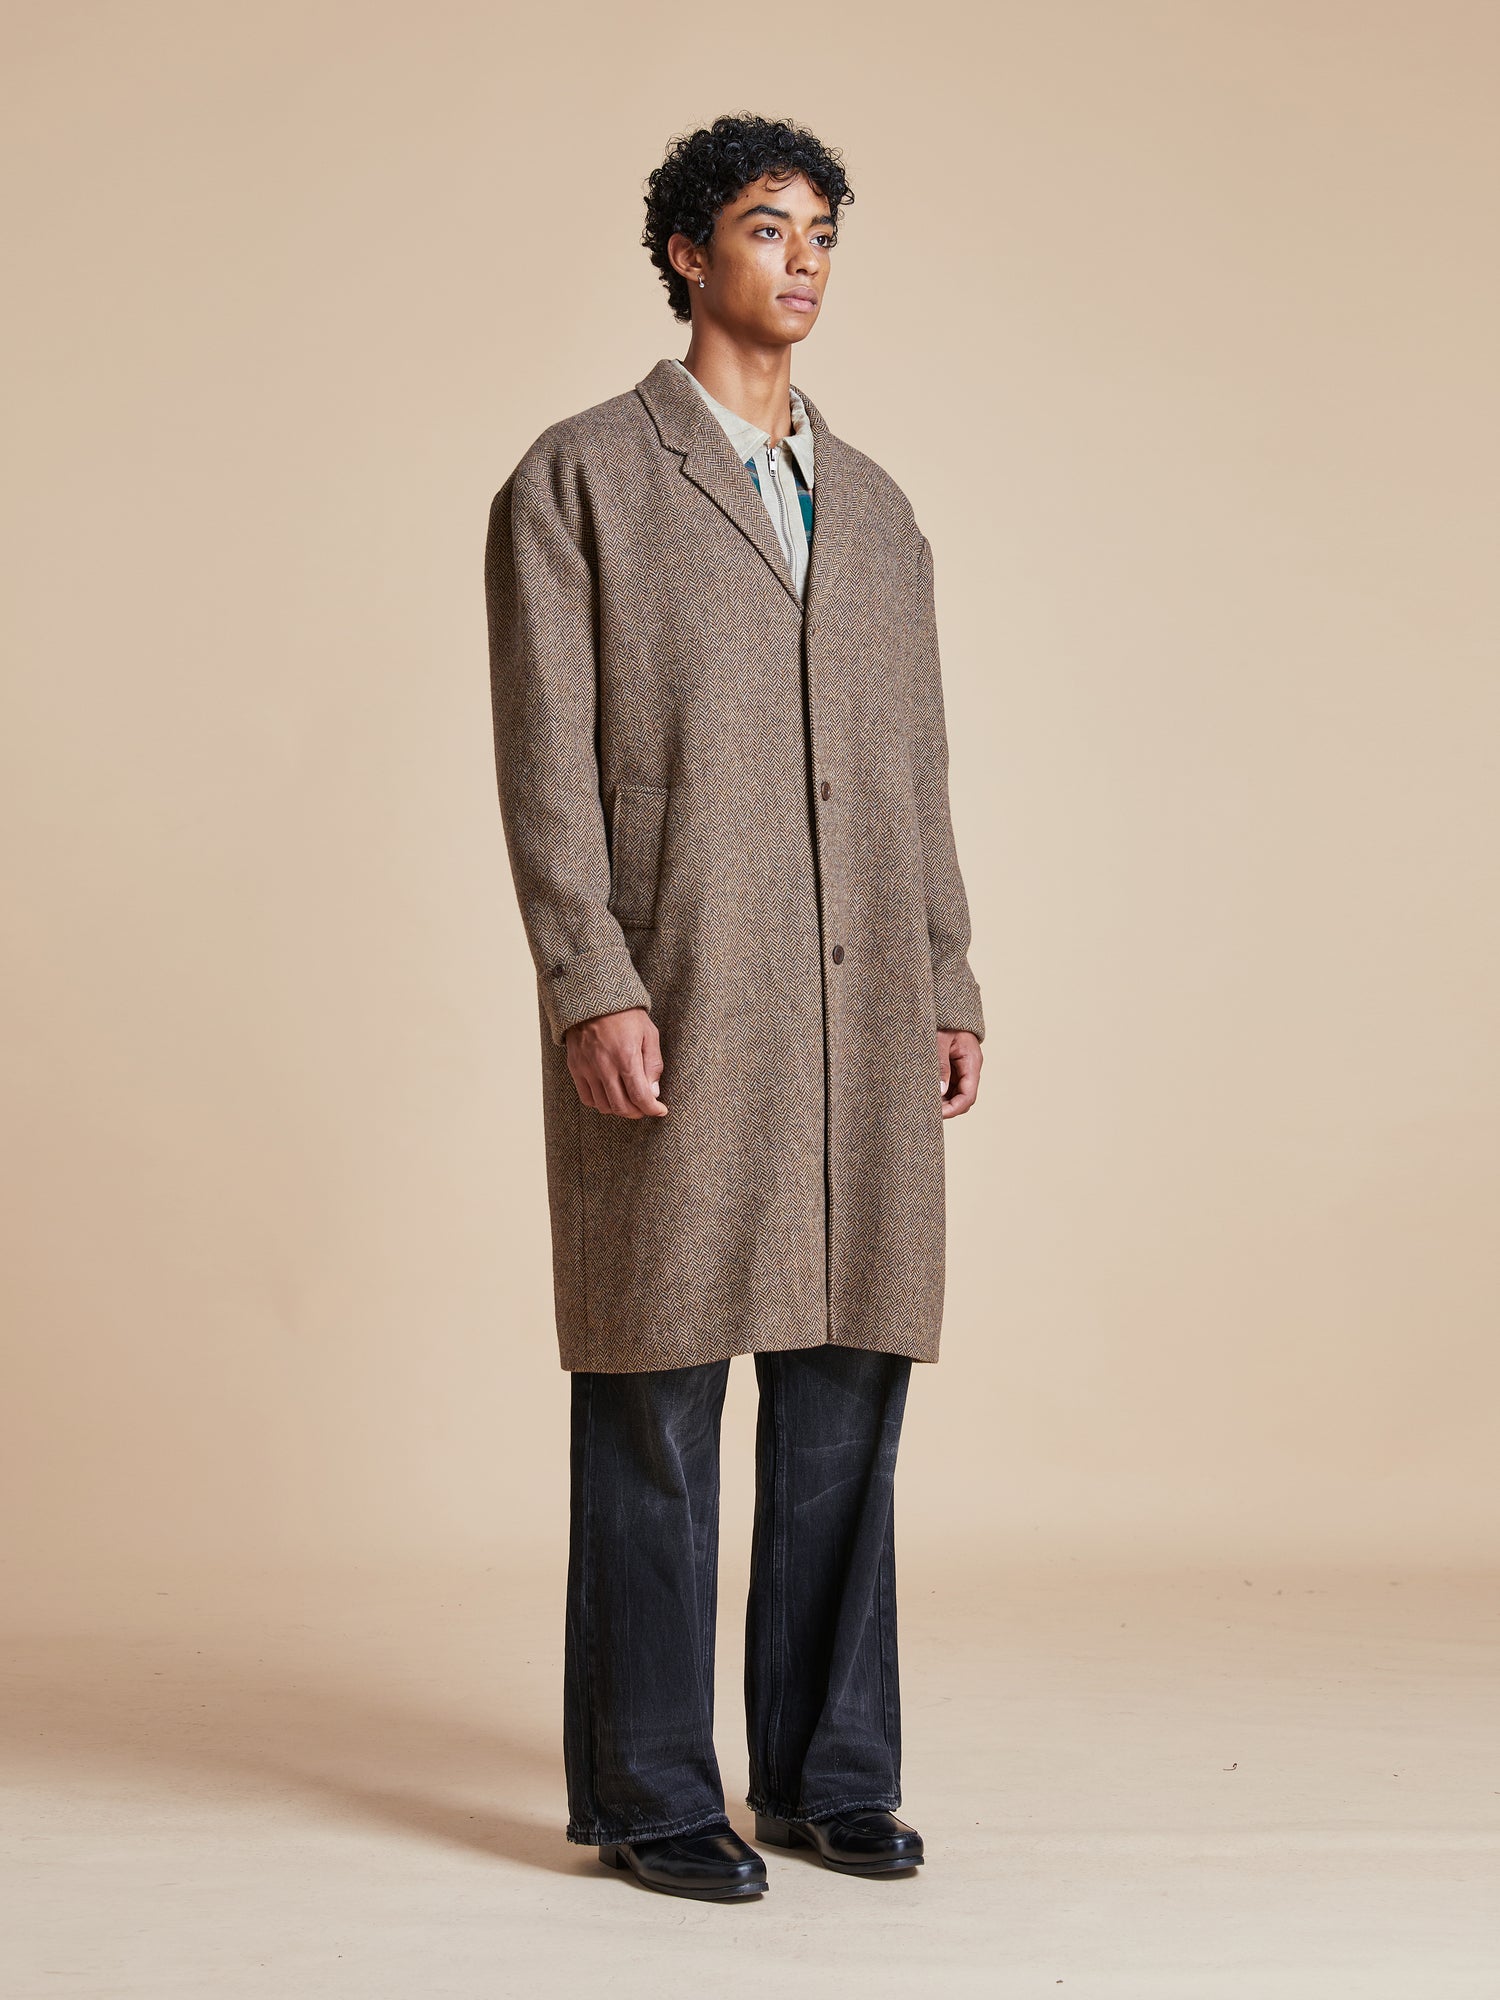 A man is standing in an Elm Tweed Long Top Coat by Found.